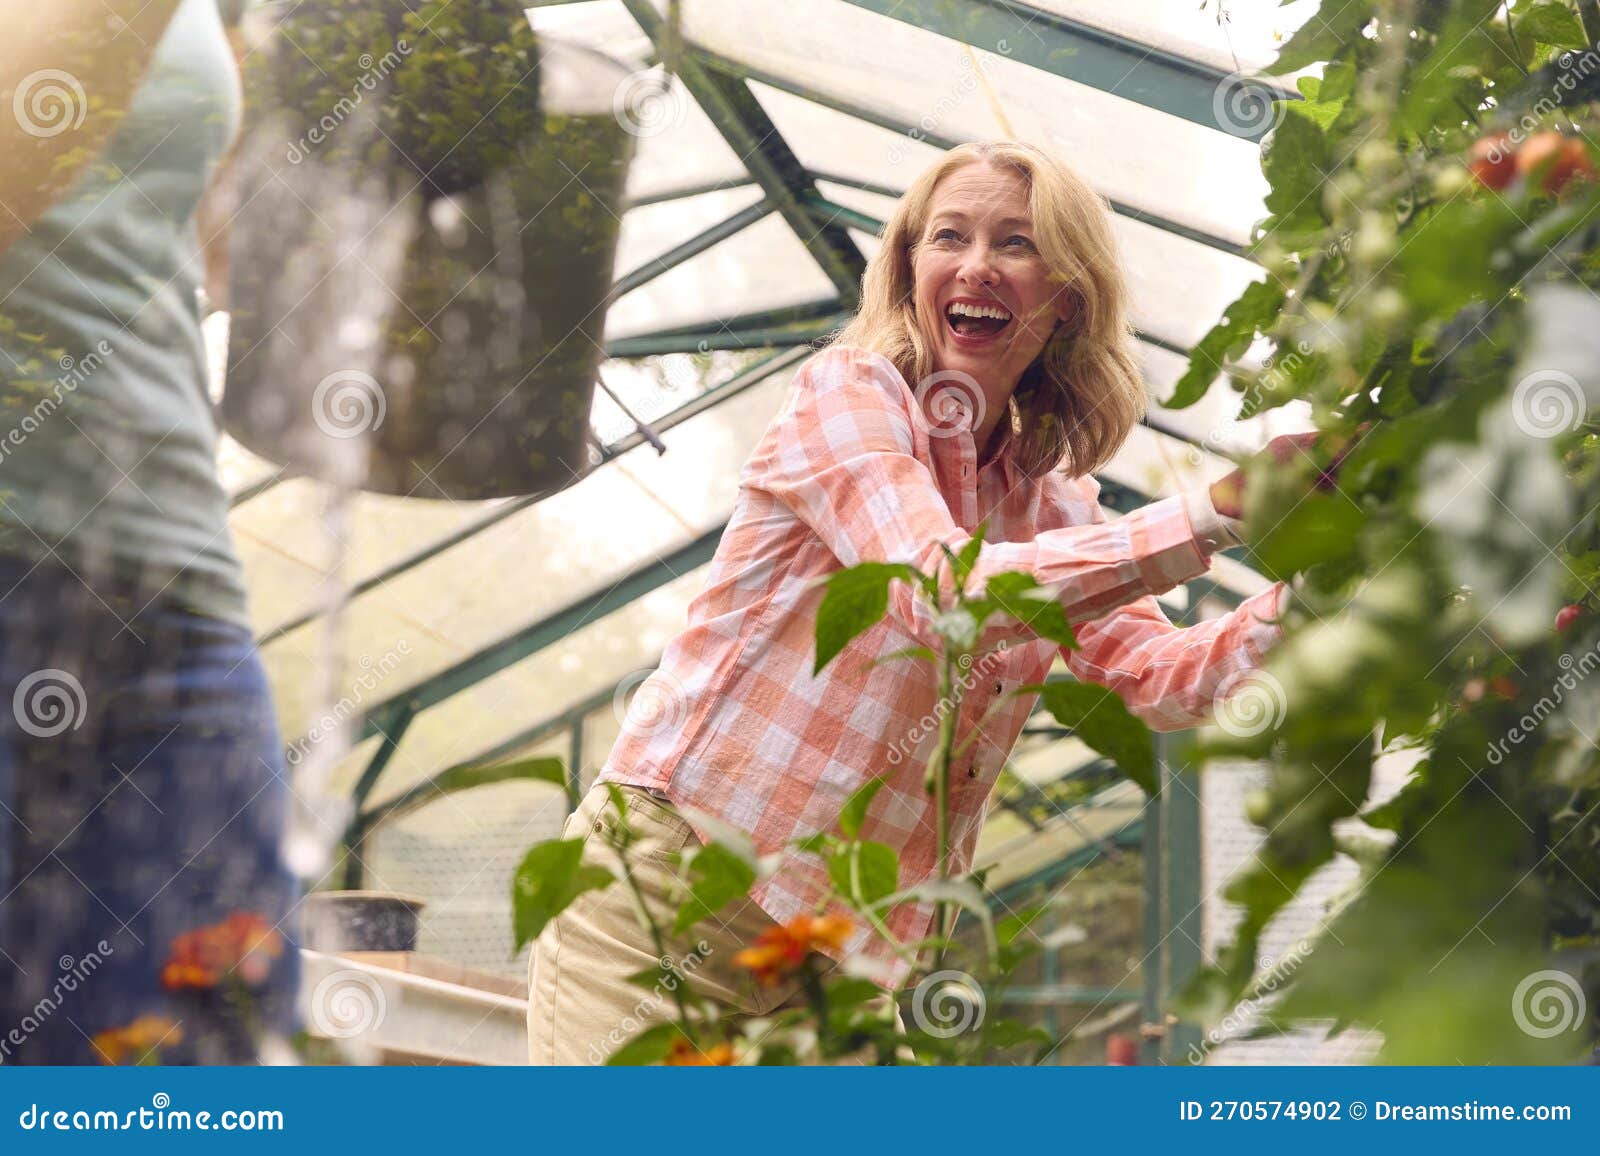 Mature Same Sex Female Couple Working in Greenhouse Watering Plants Together Stock Photo